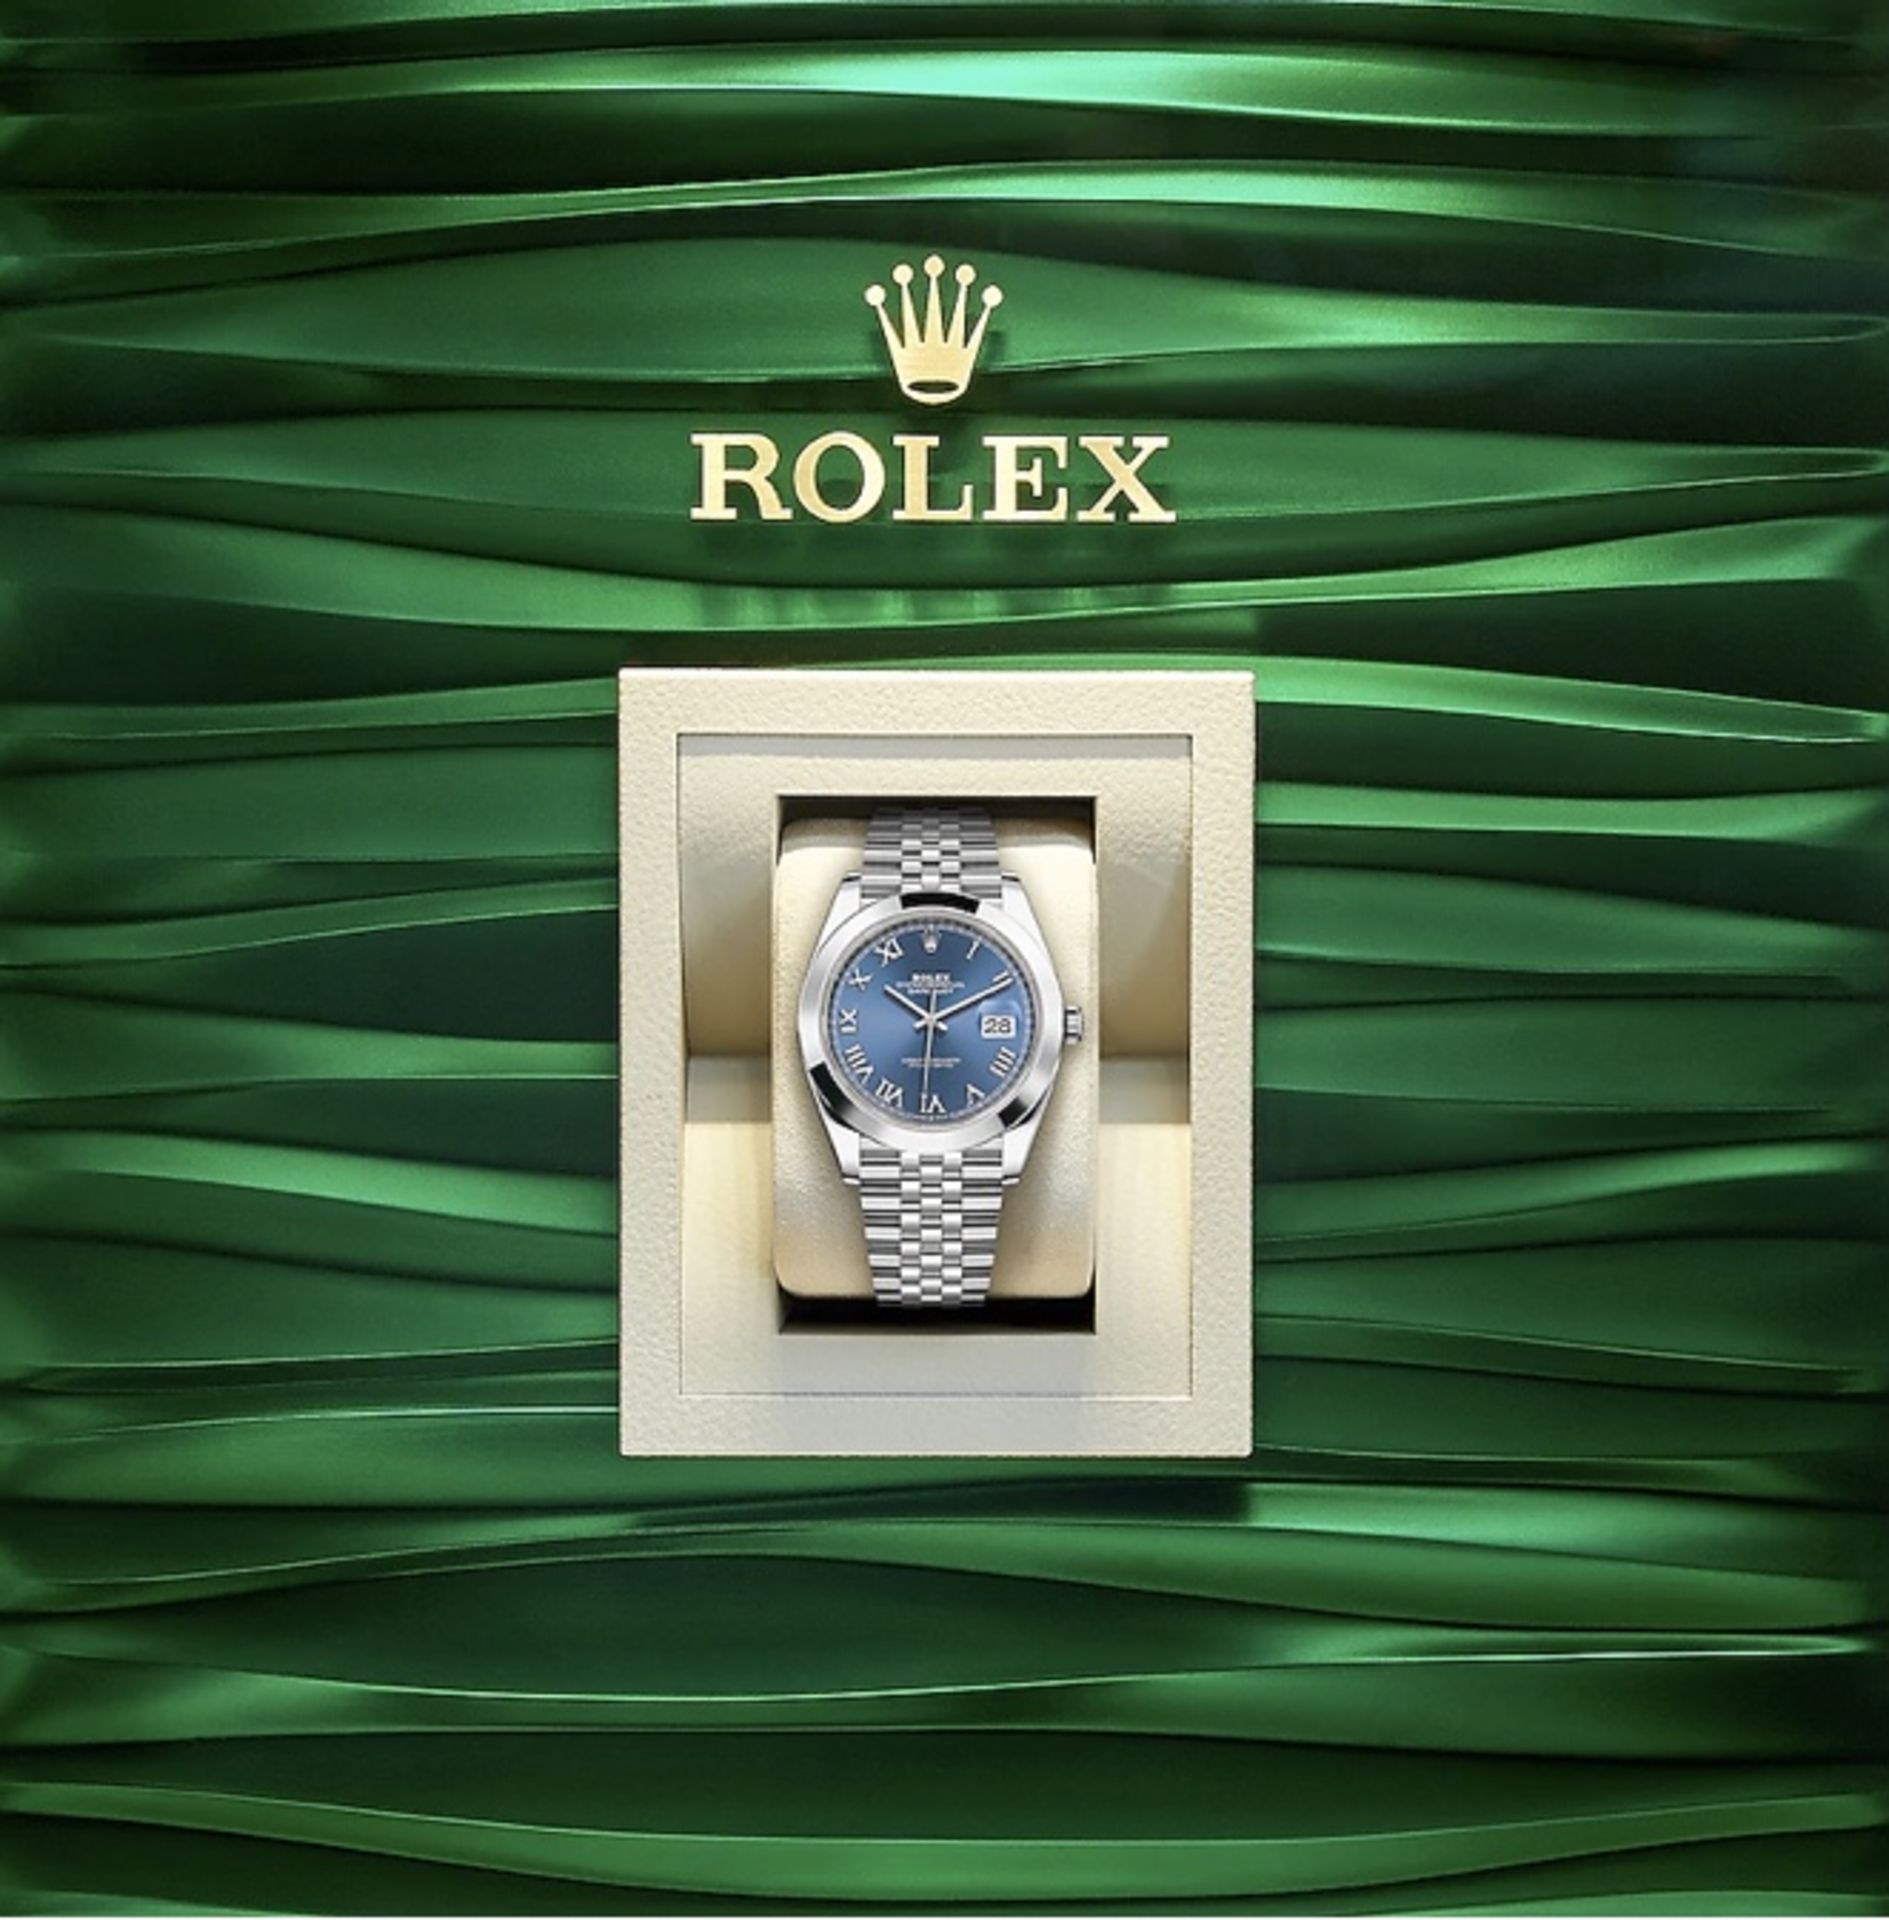 (On Sale) ROLEX DATEJUST 41mm "OYSTERSTEEL" WITH "AZZURRO BLUE" DIAL (BRAND NEW 2020) ALL NEW MODEL - Image 2 of 2